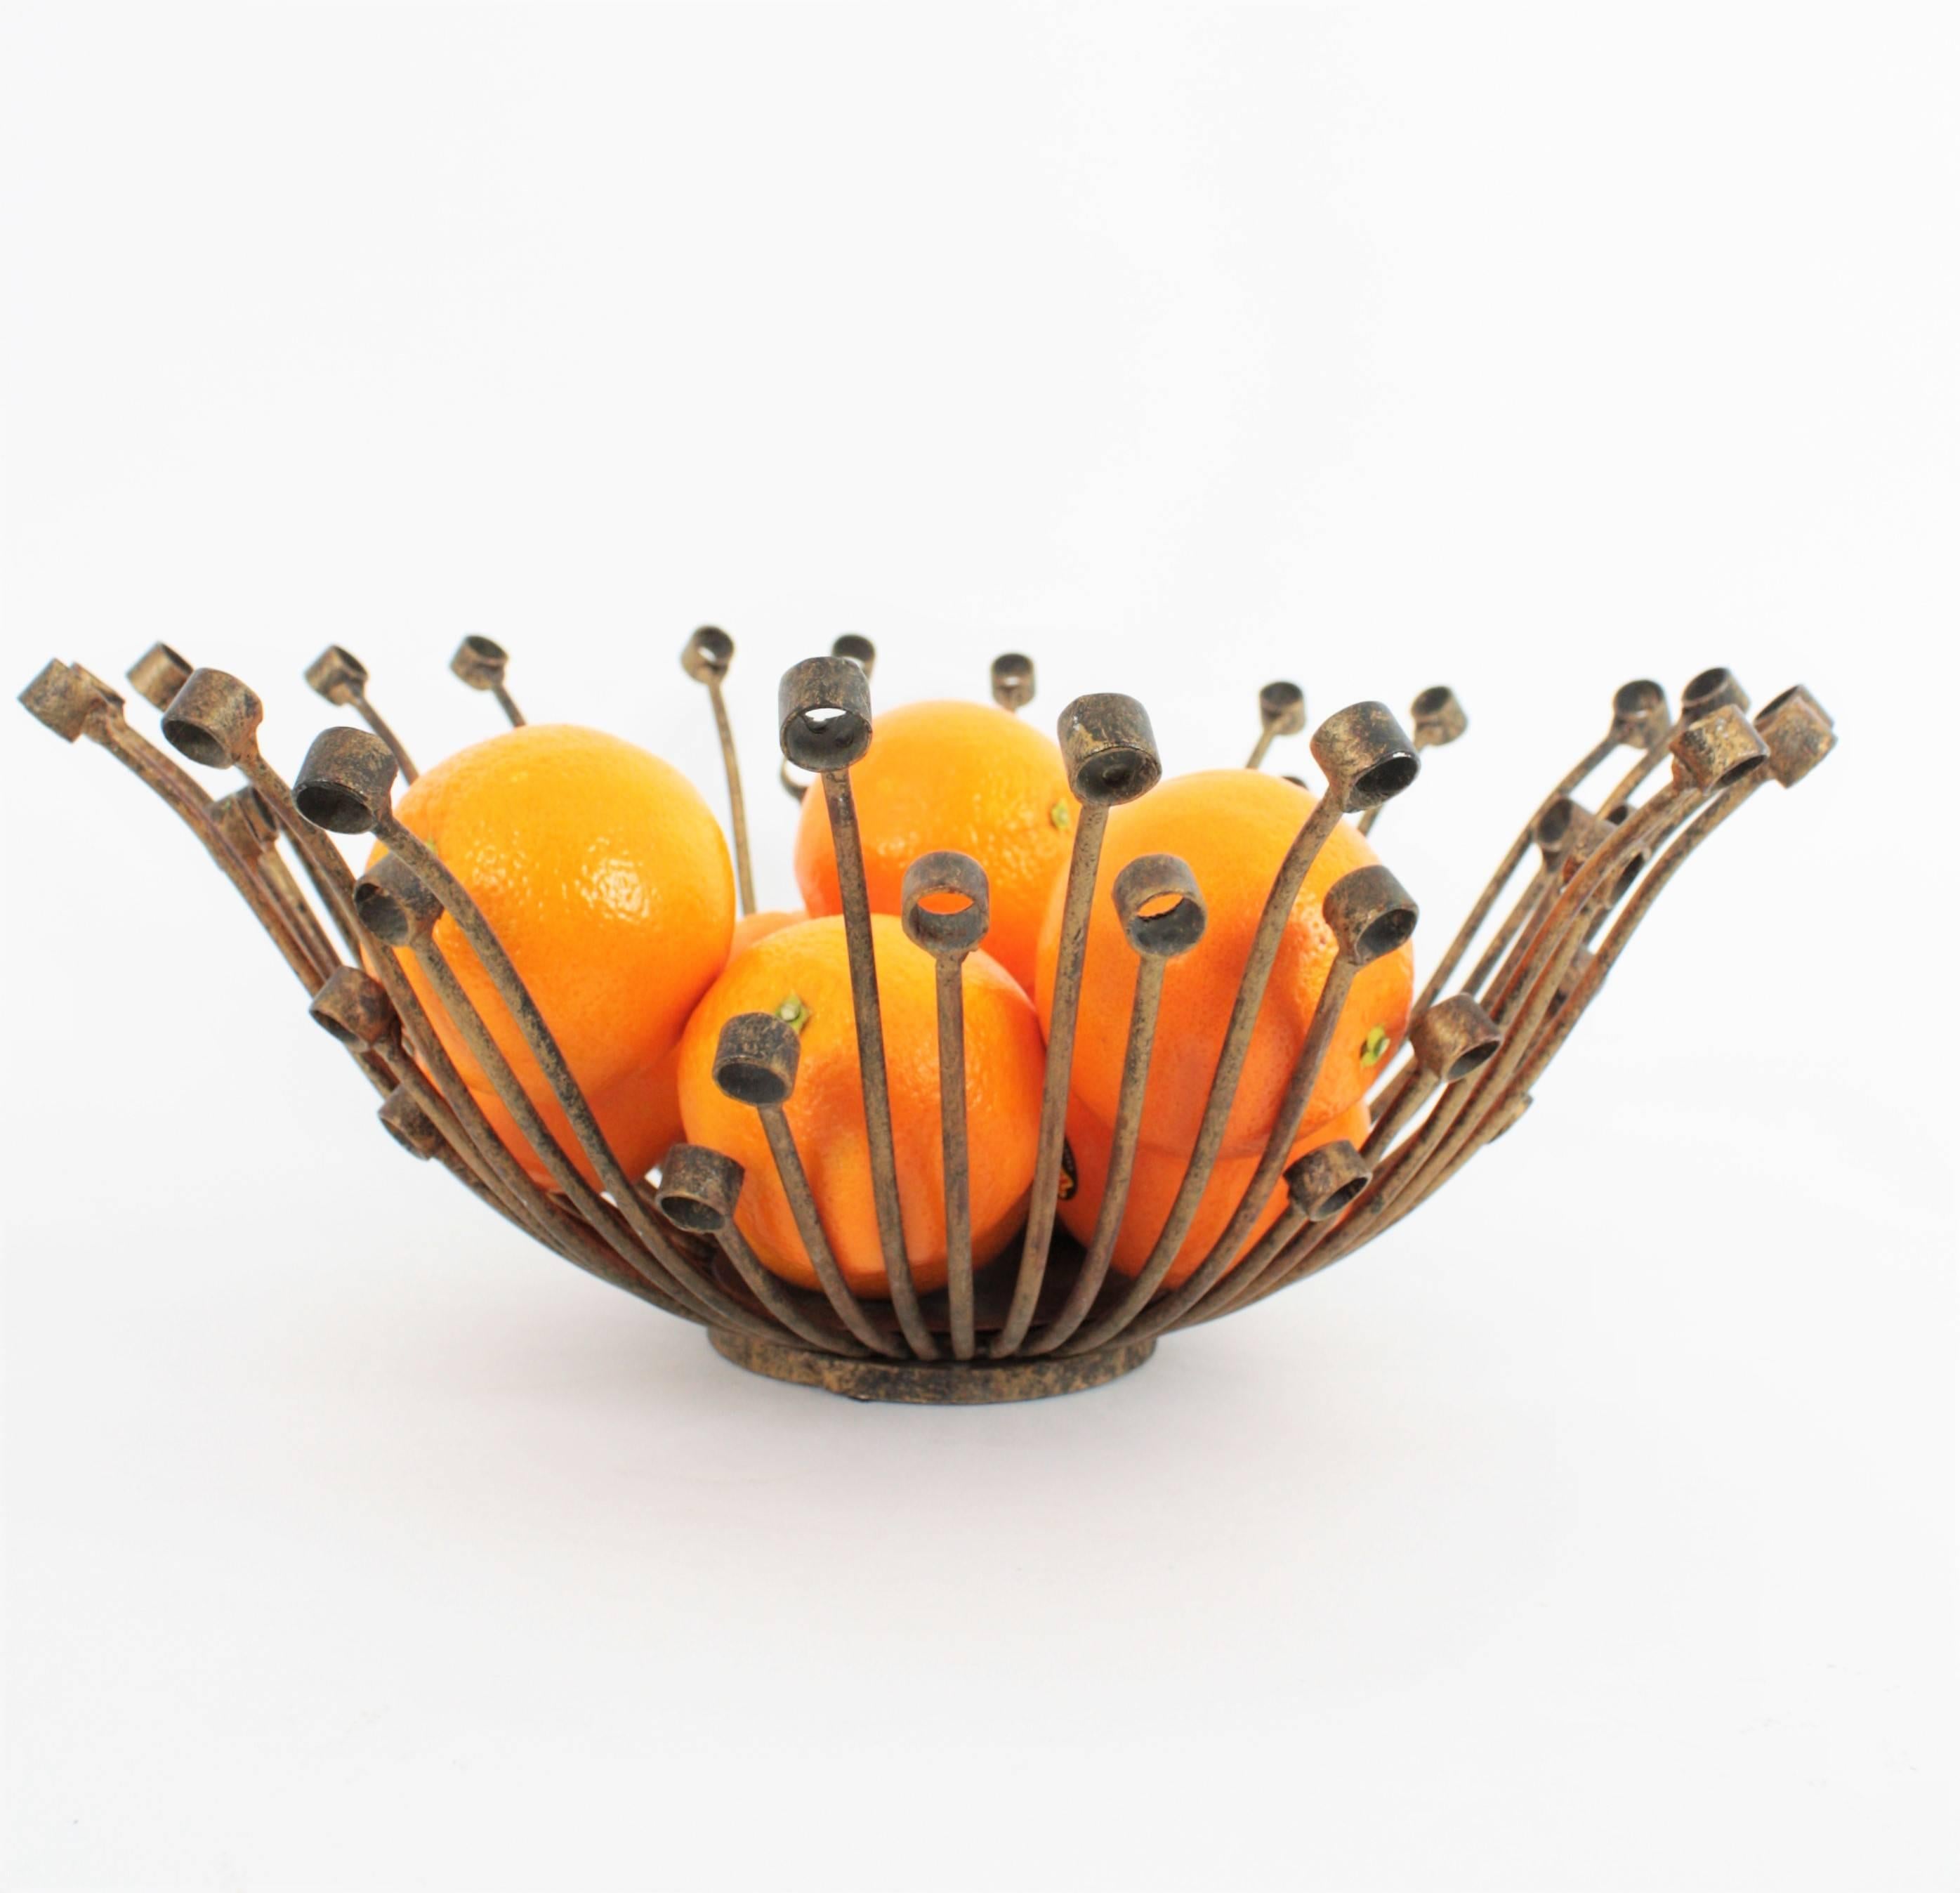 Unusual hand-hammered iron centerpiece or fruit bowl with gold leaf accents with sunburst shape. This hand crafted piece is made with iron tubes placed as sun beams and finished by iron rings. Its design is sculptural and highly decorative. 
Spain,